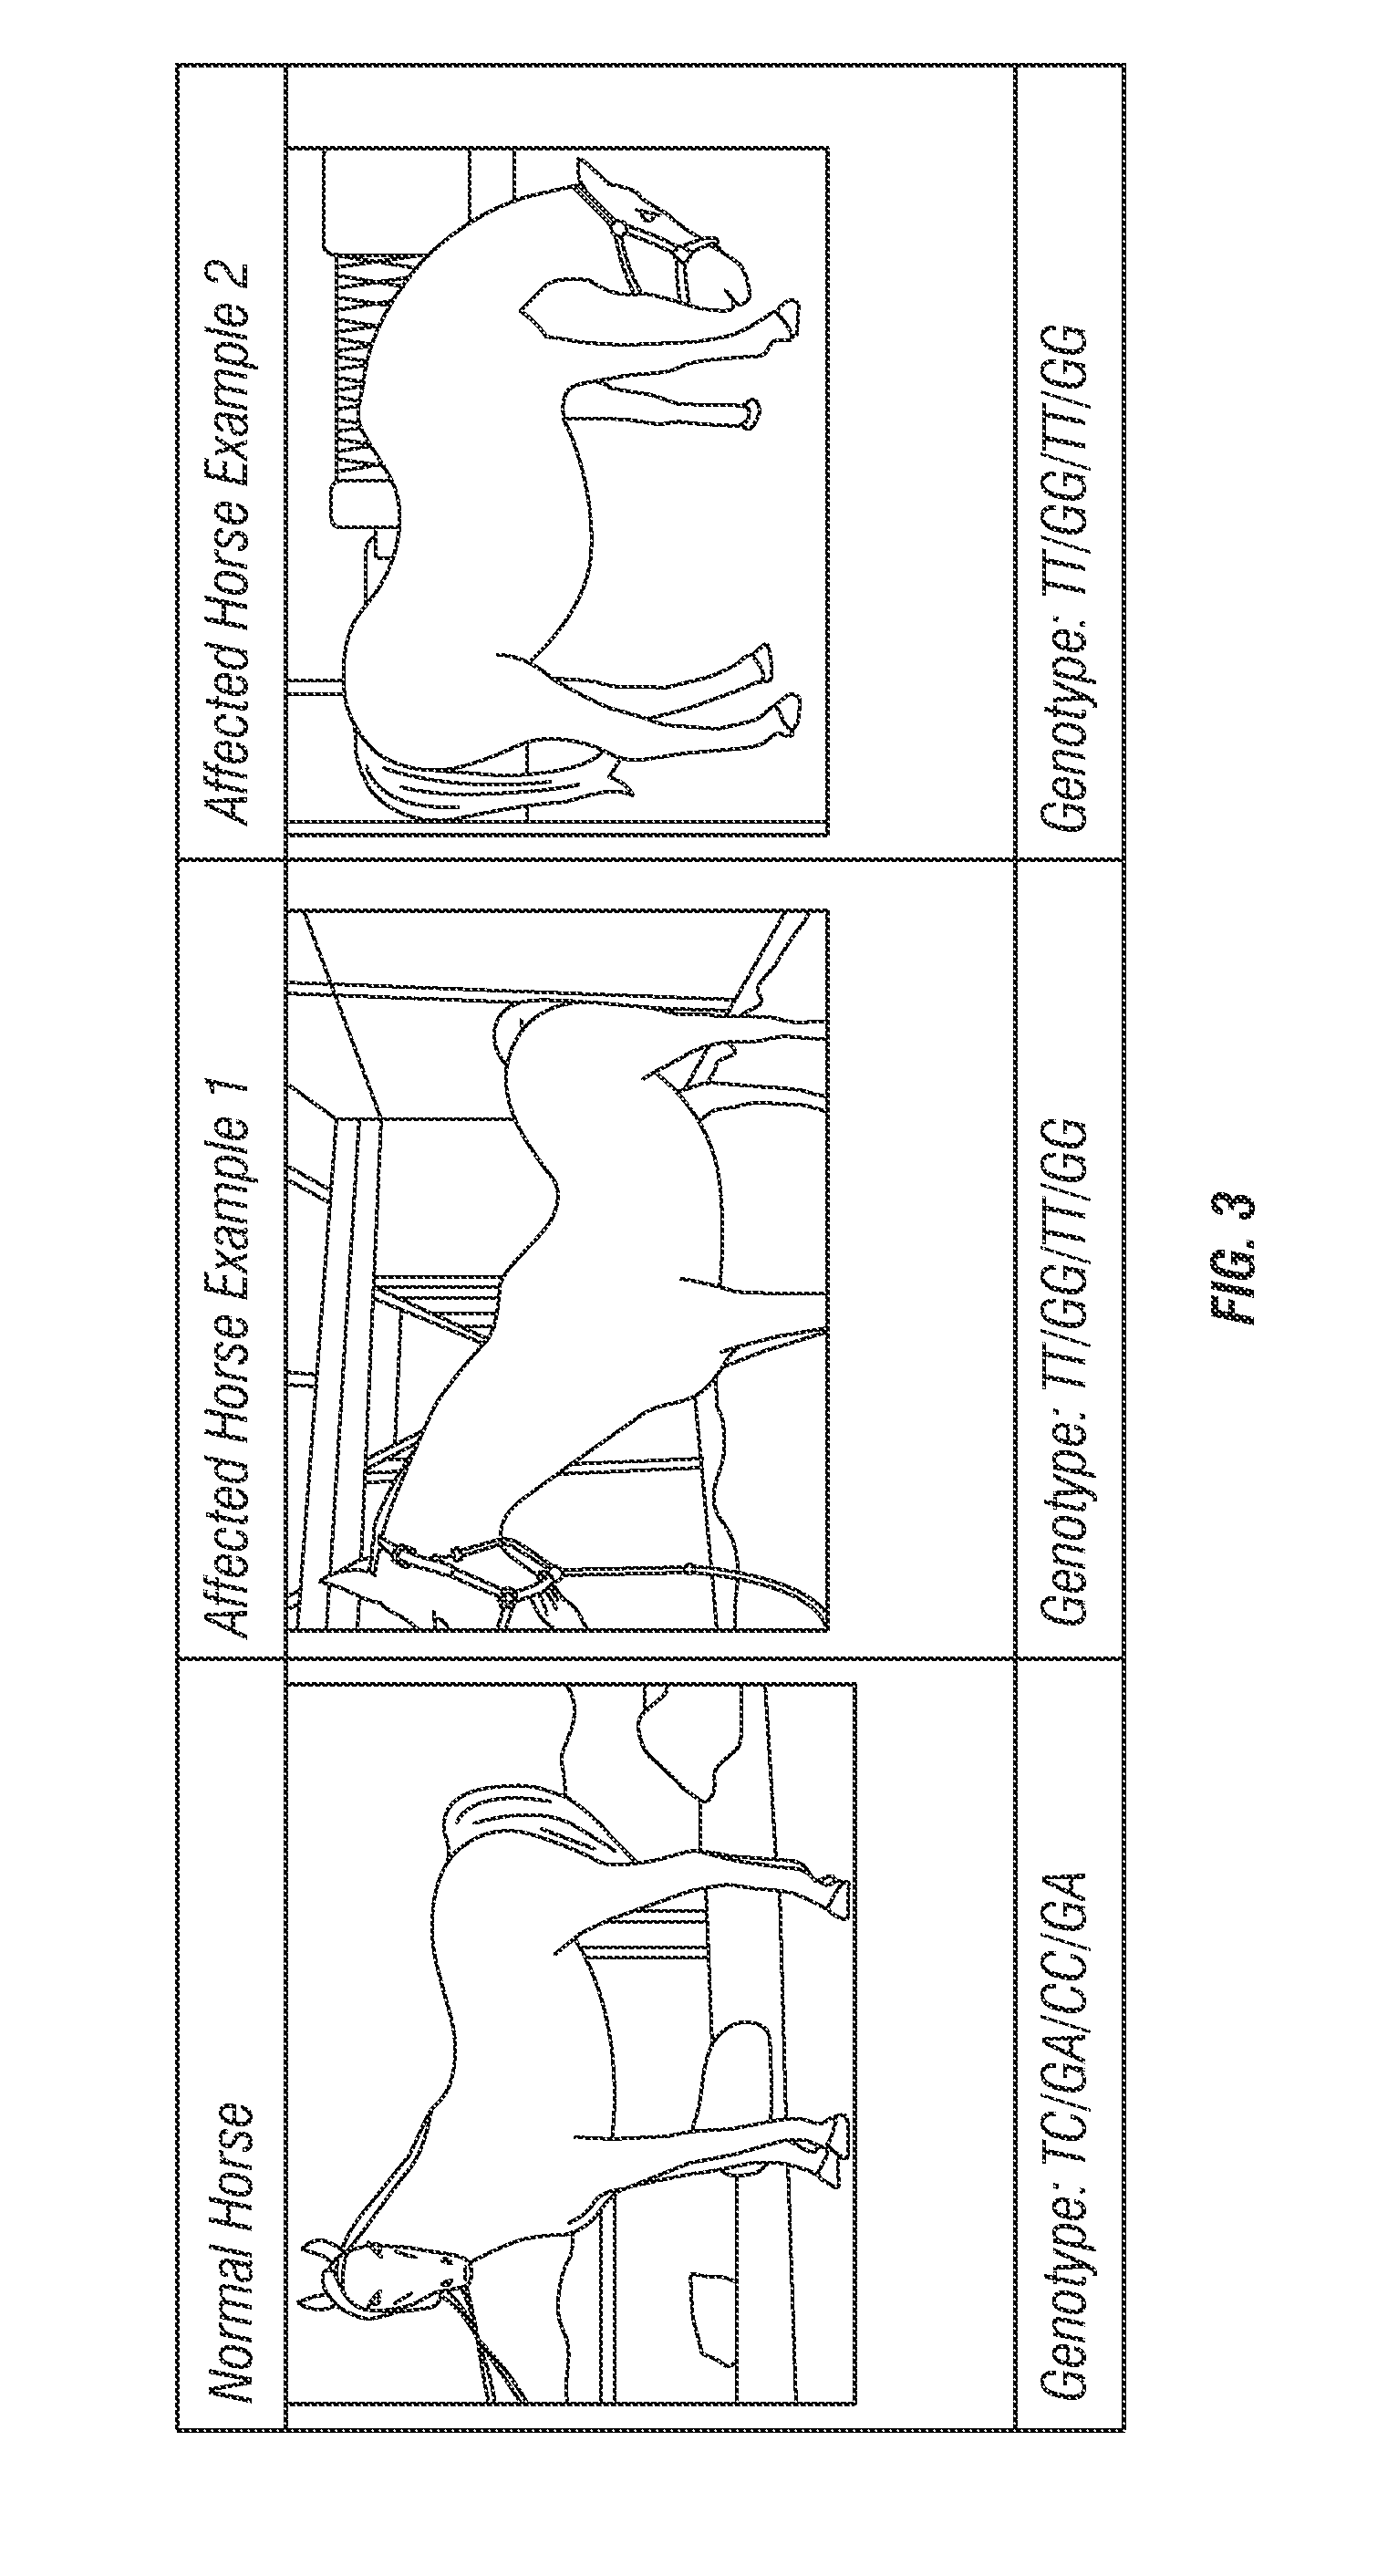 Method for Evaluating Health and Genetic Predisposition of Animals